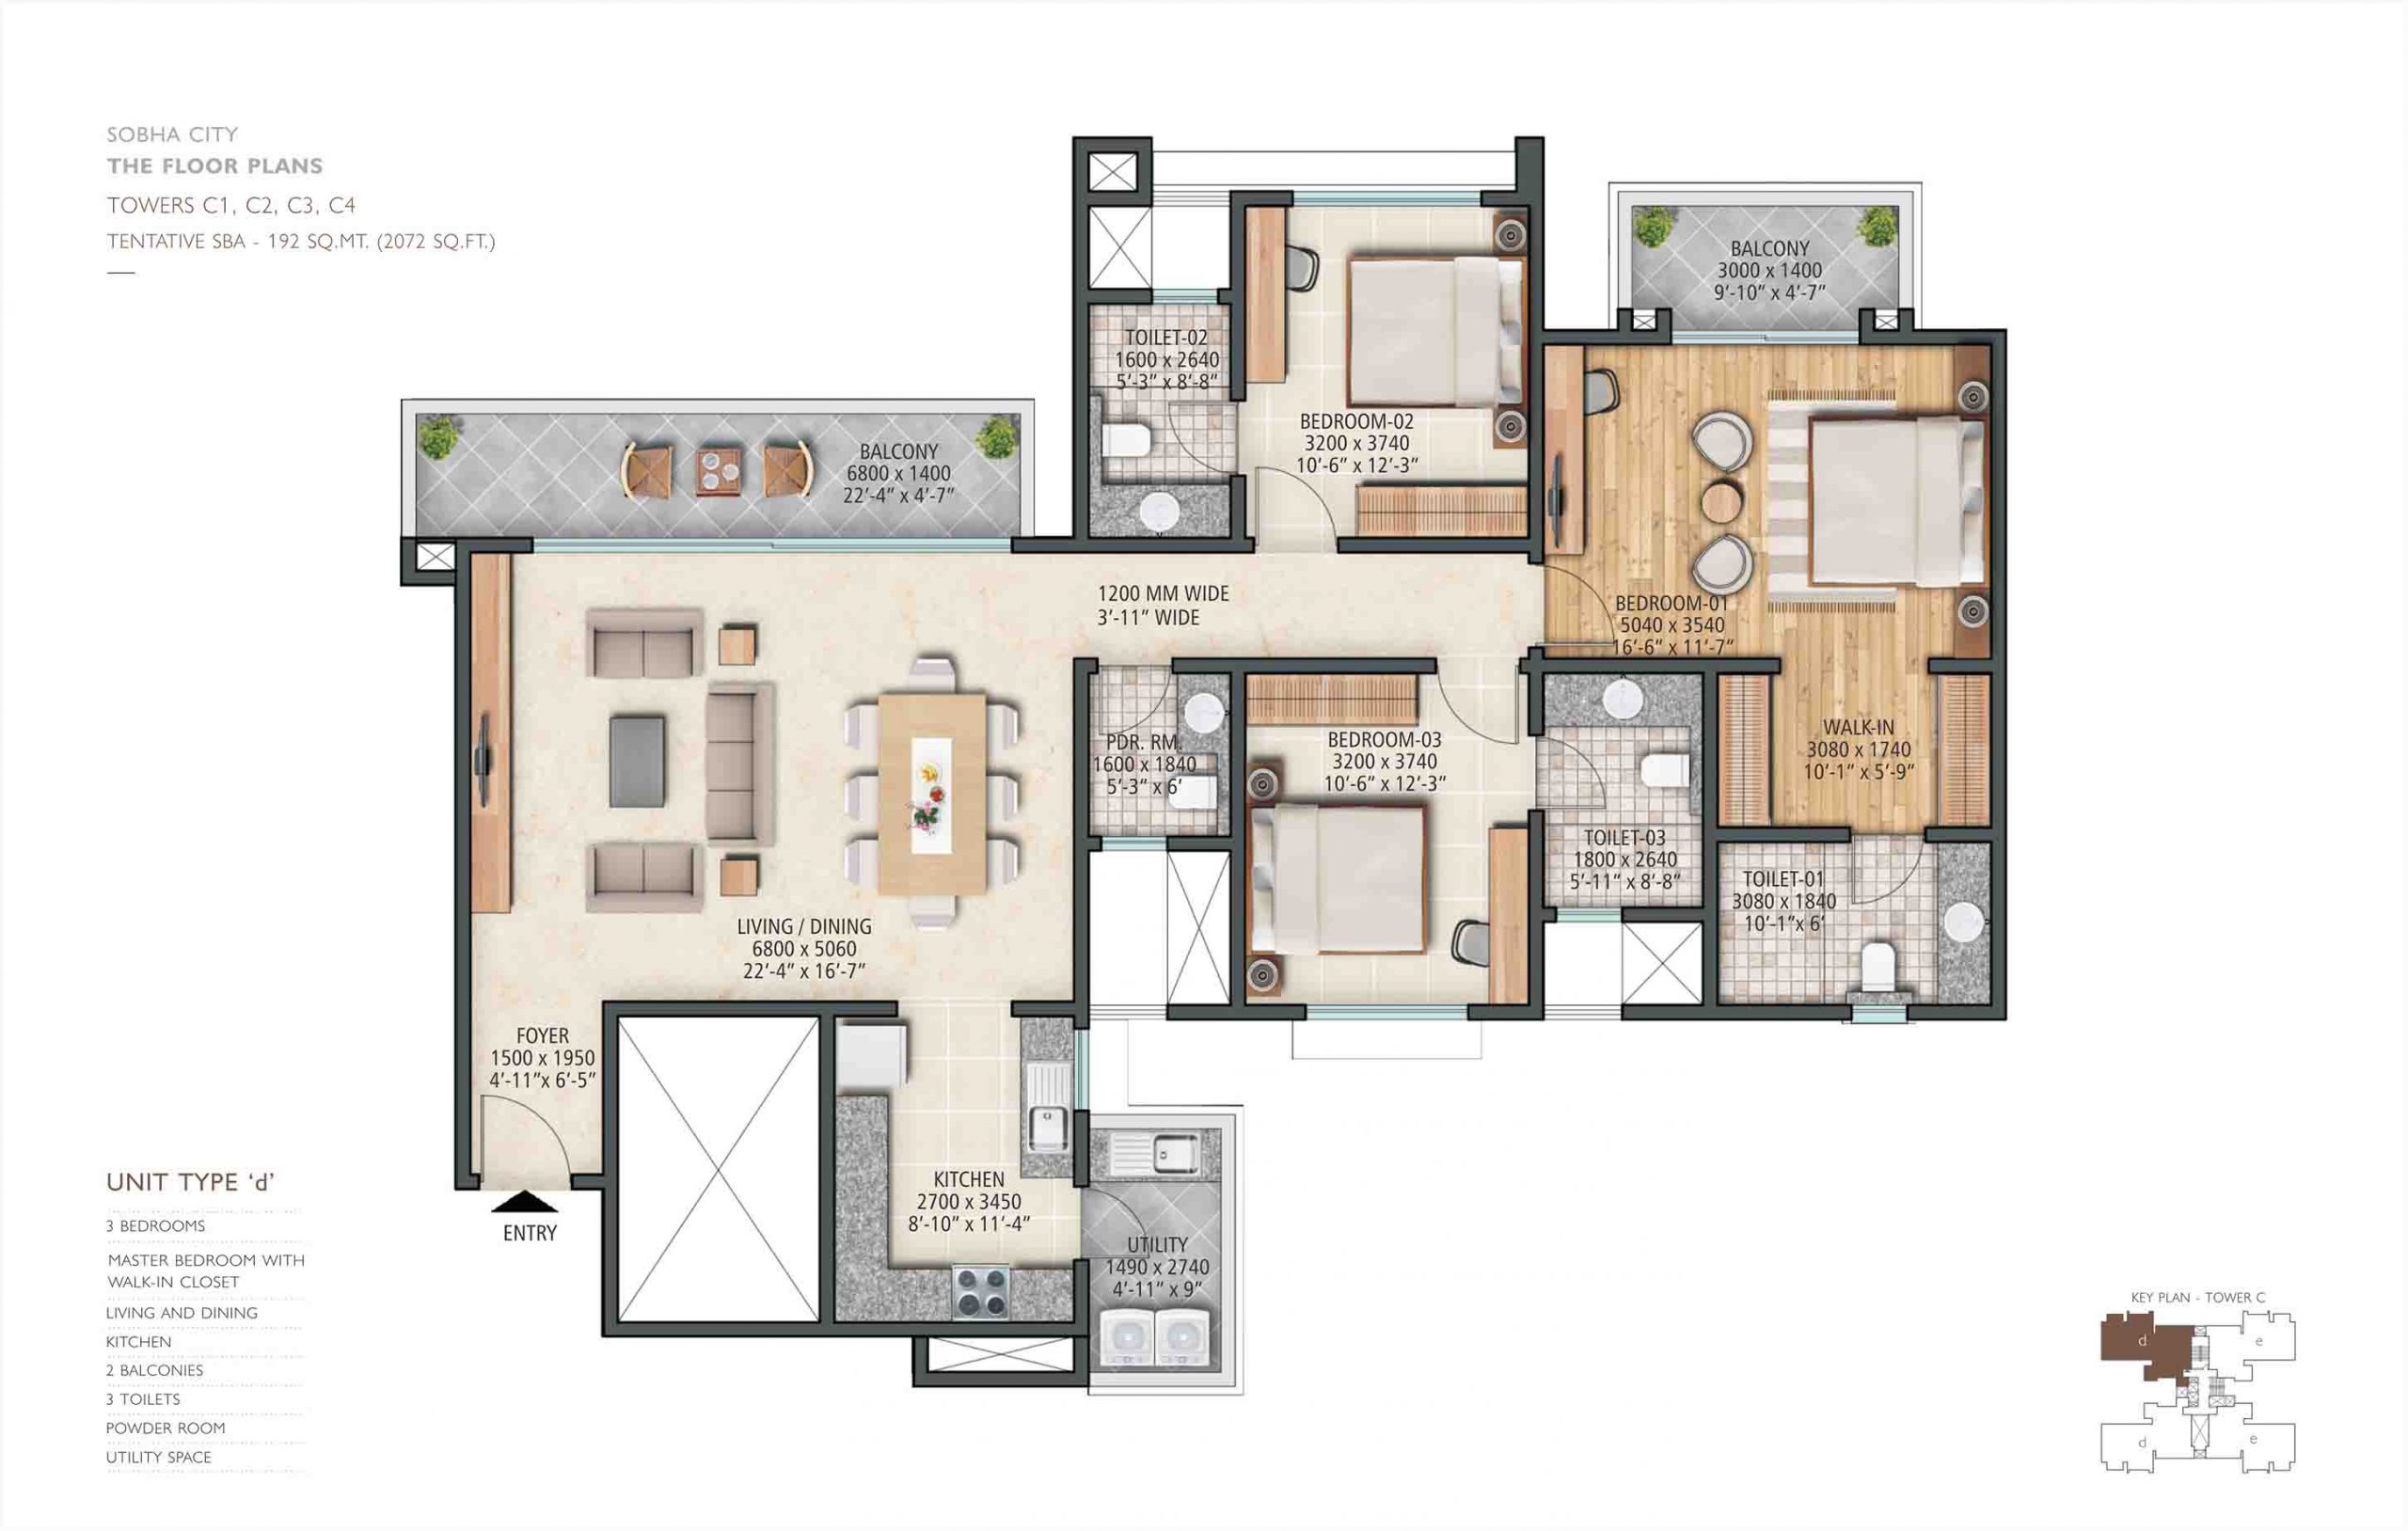 3BHK+Utility Space + Power Space-Type ‘d’- 192 sq. mt. (2072 sq. ft.)